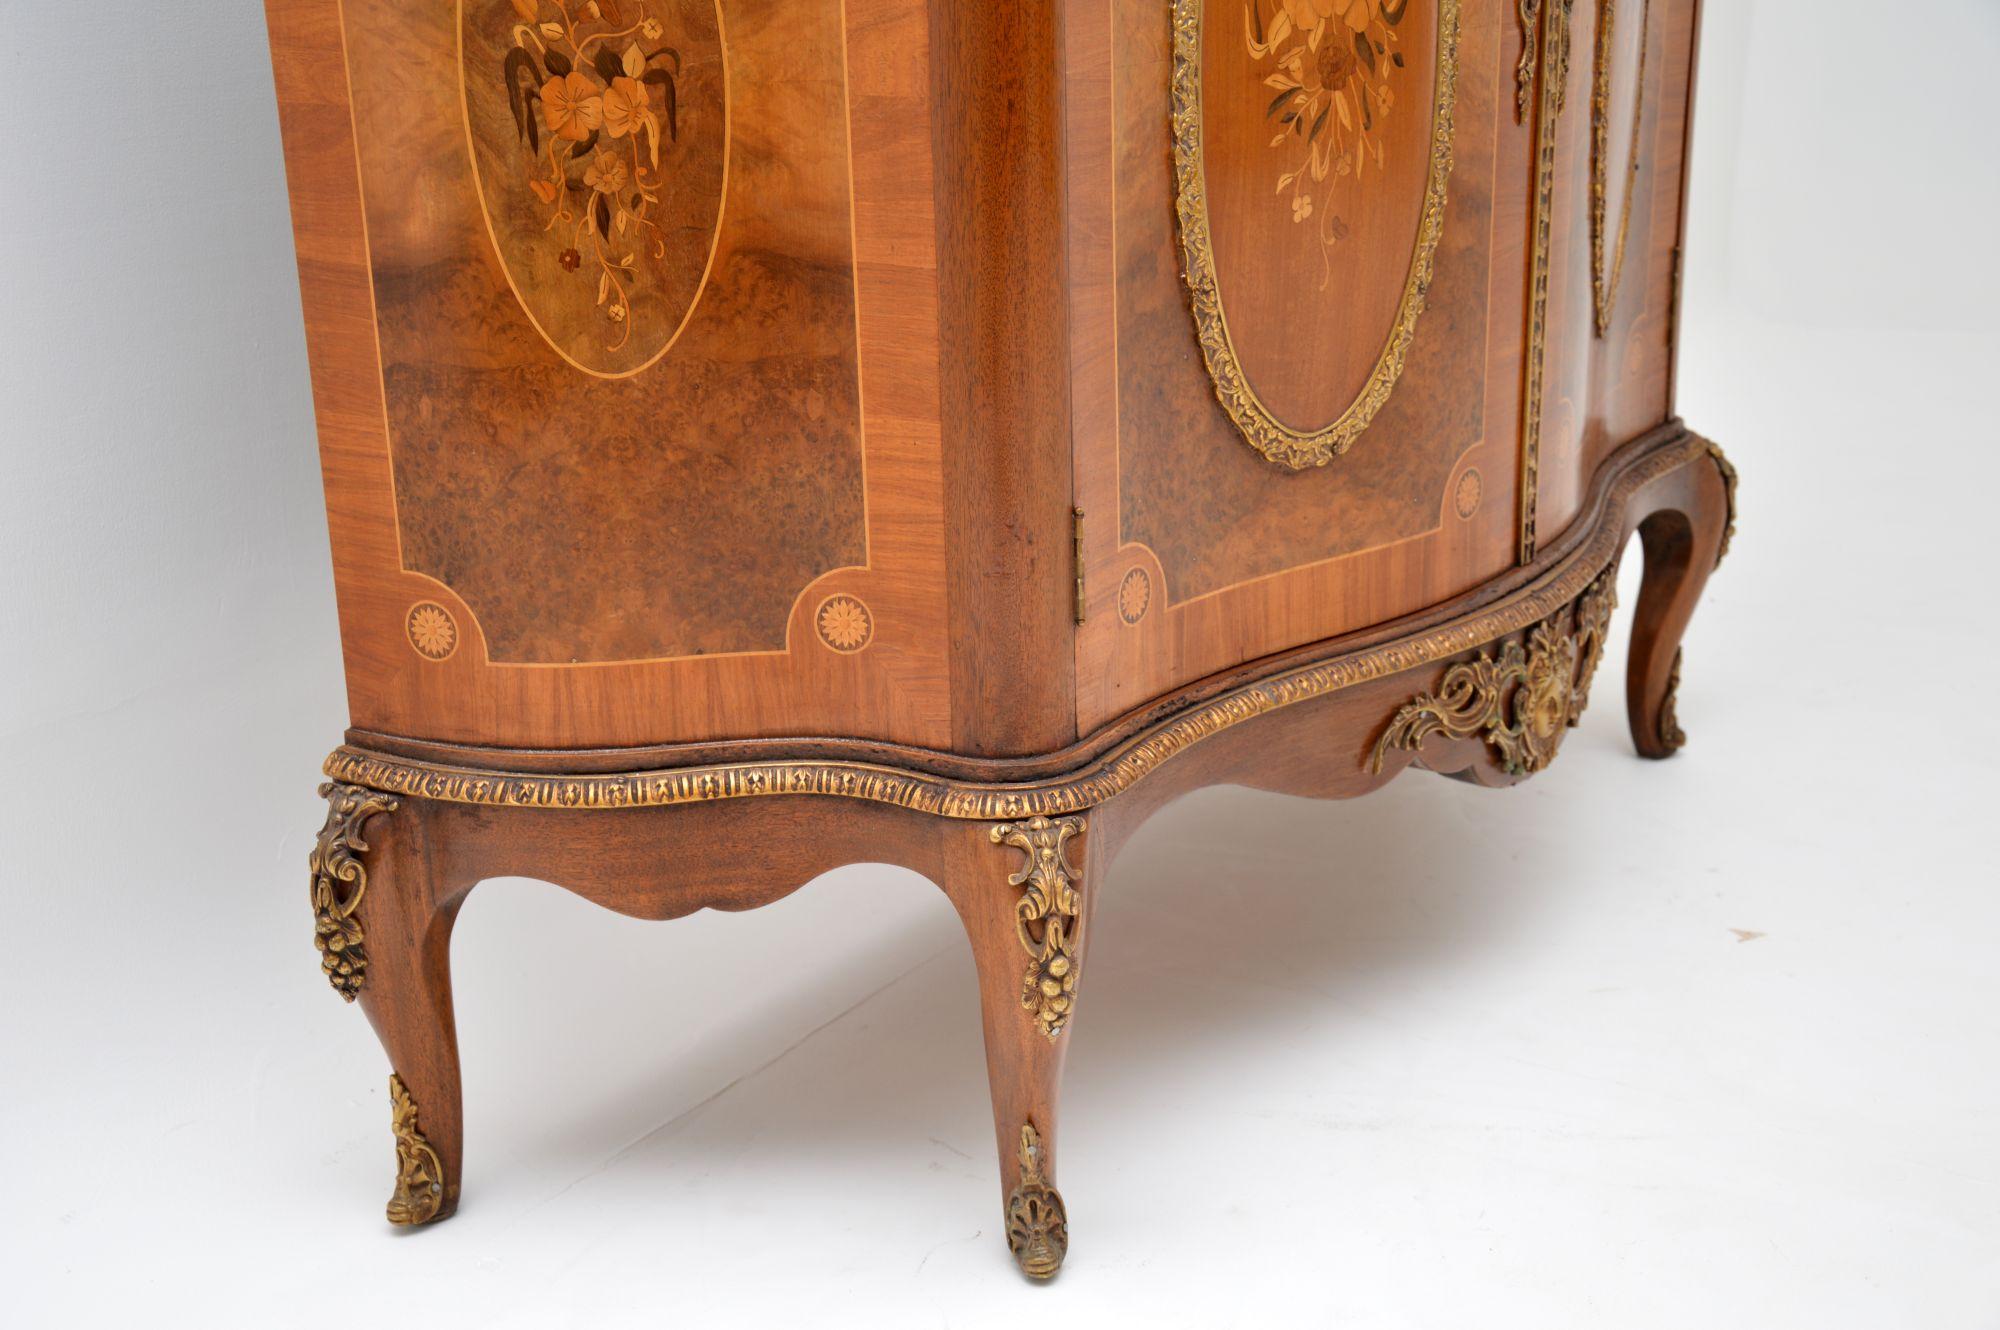 20th Century Antique French Inlaid Marble-Top Cabinet